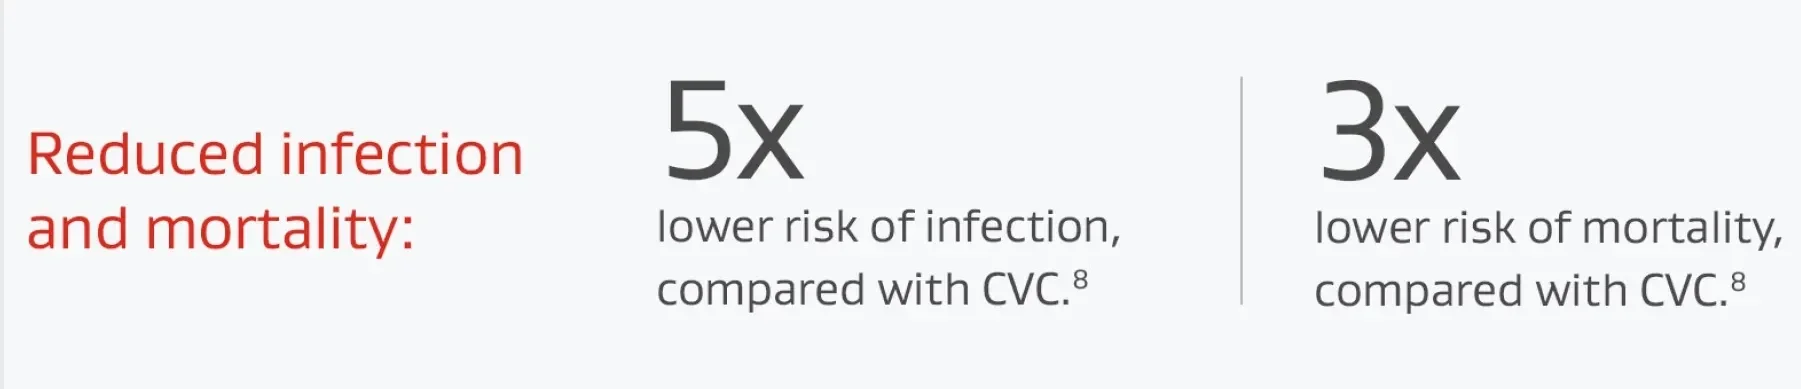 Reduced infection and mortality: 5x lower risk of infection, compared with CVC; 3x lower risk of mortality, compared with CVC